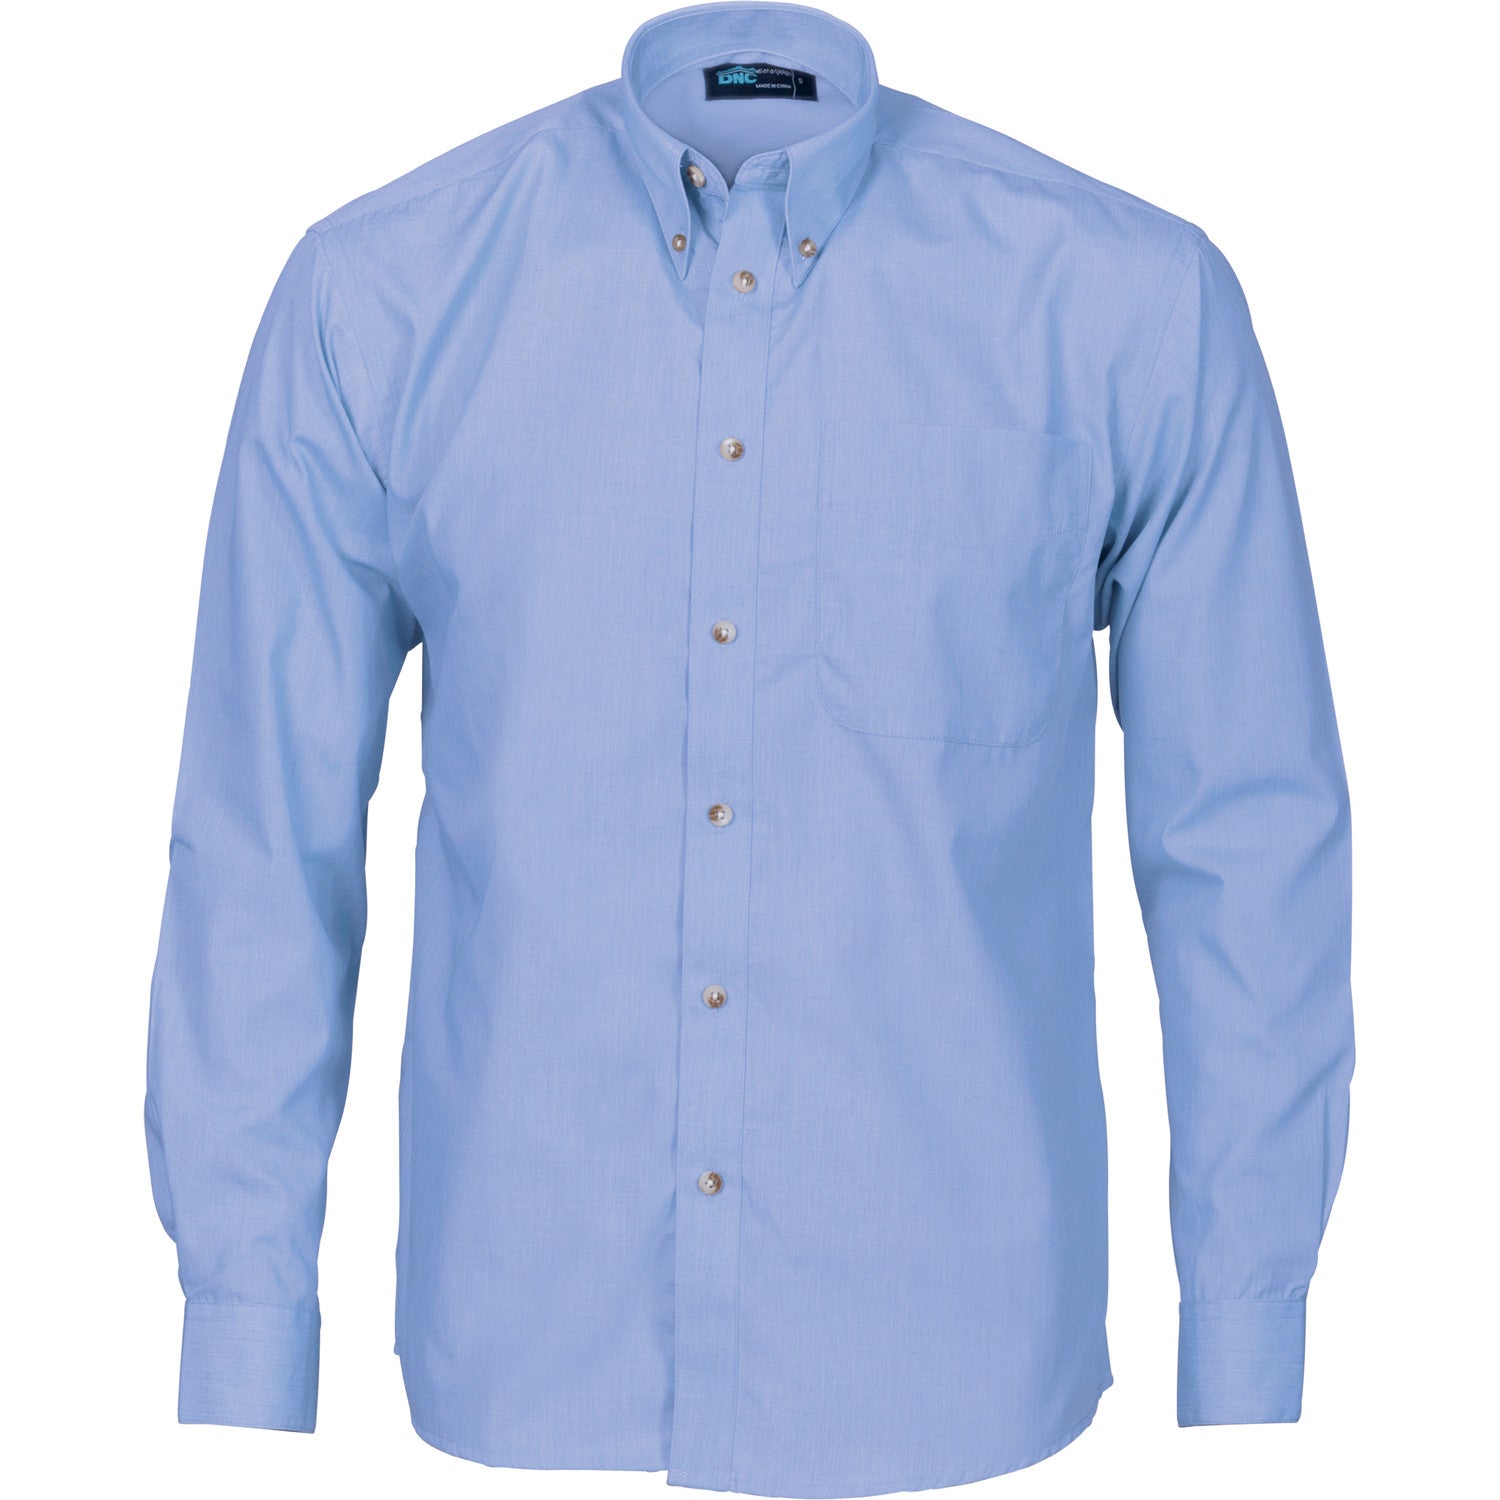 DNC Polyester Cotton Chambray L/S Business Shirt (4122)